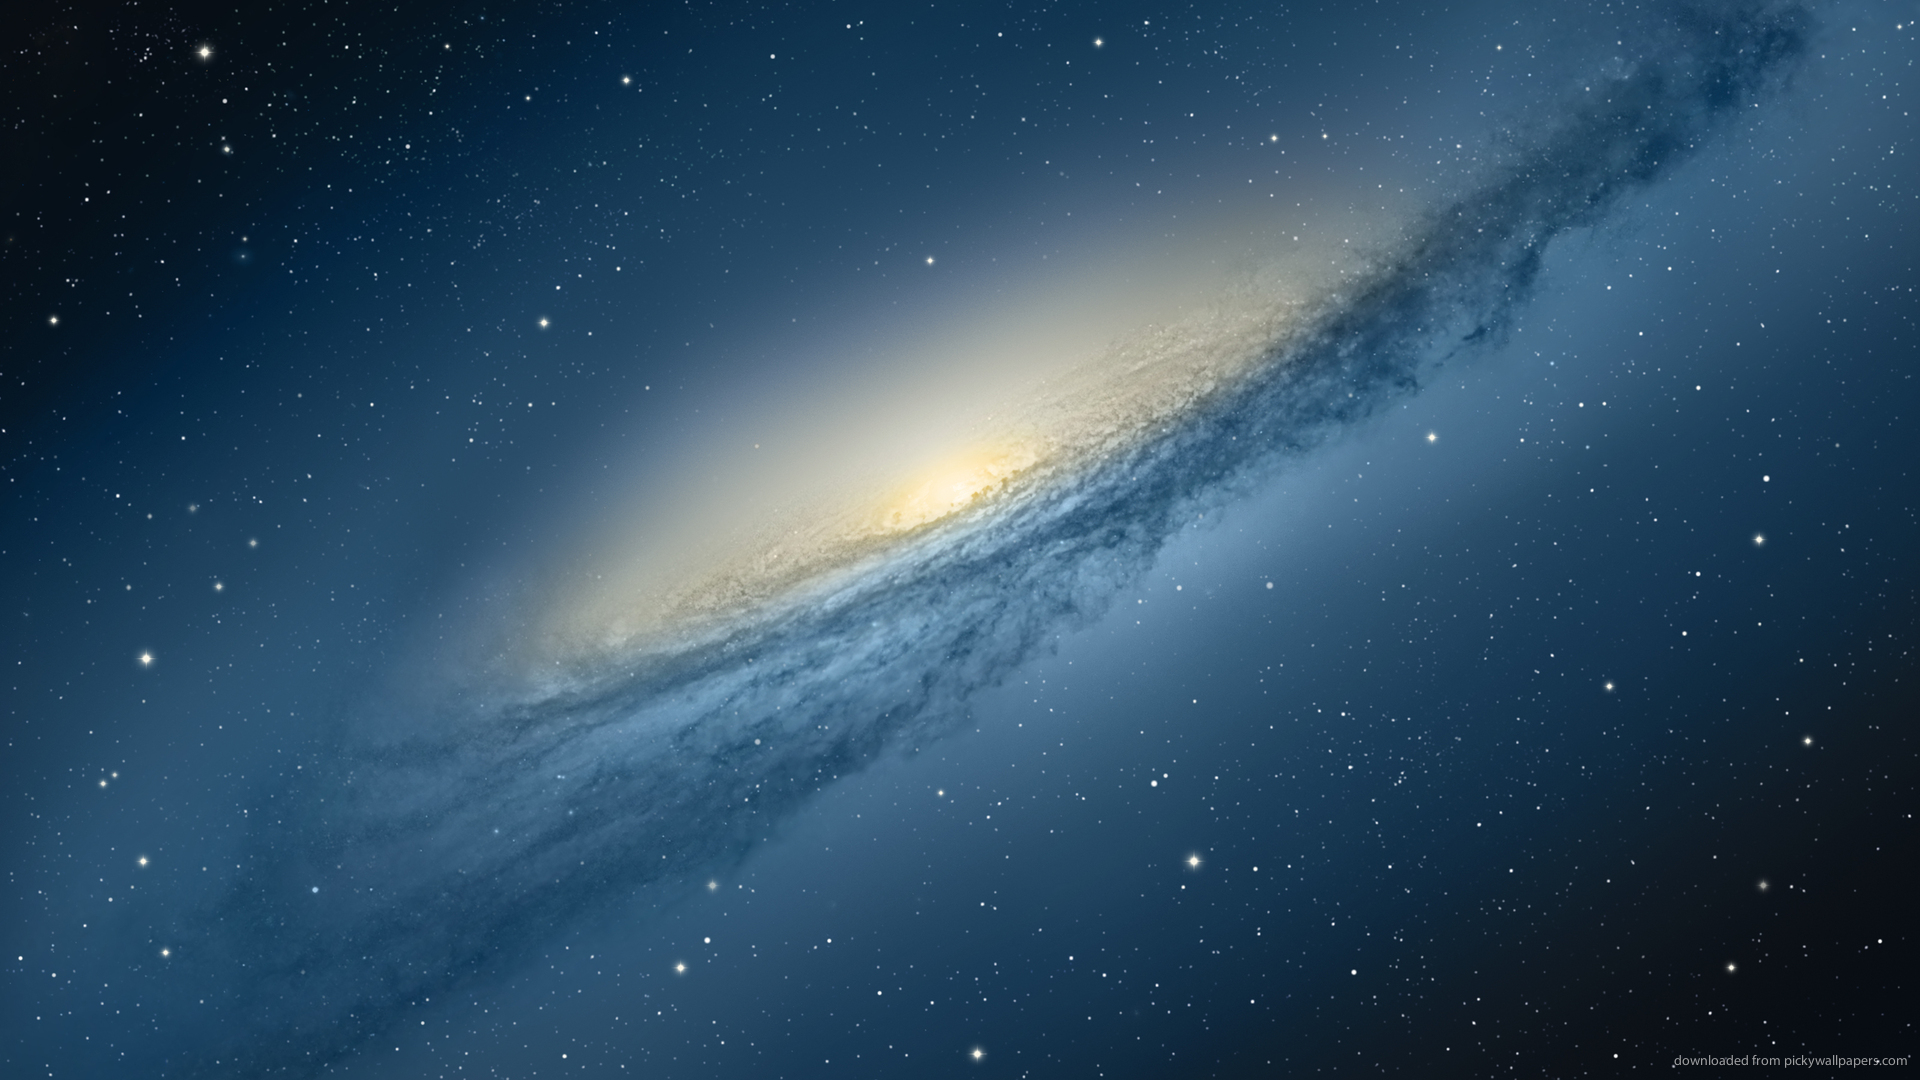 Andromeda Galaxy Wallpaper HD Pics About Space